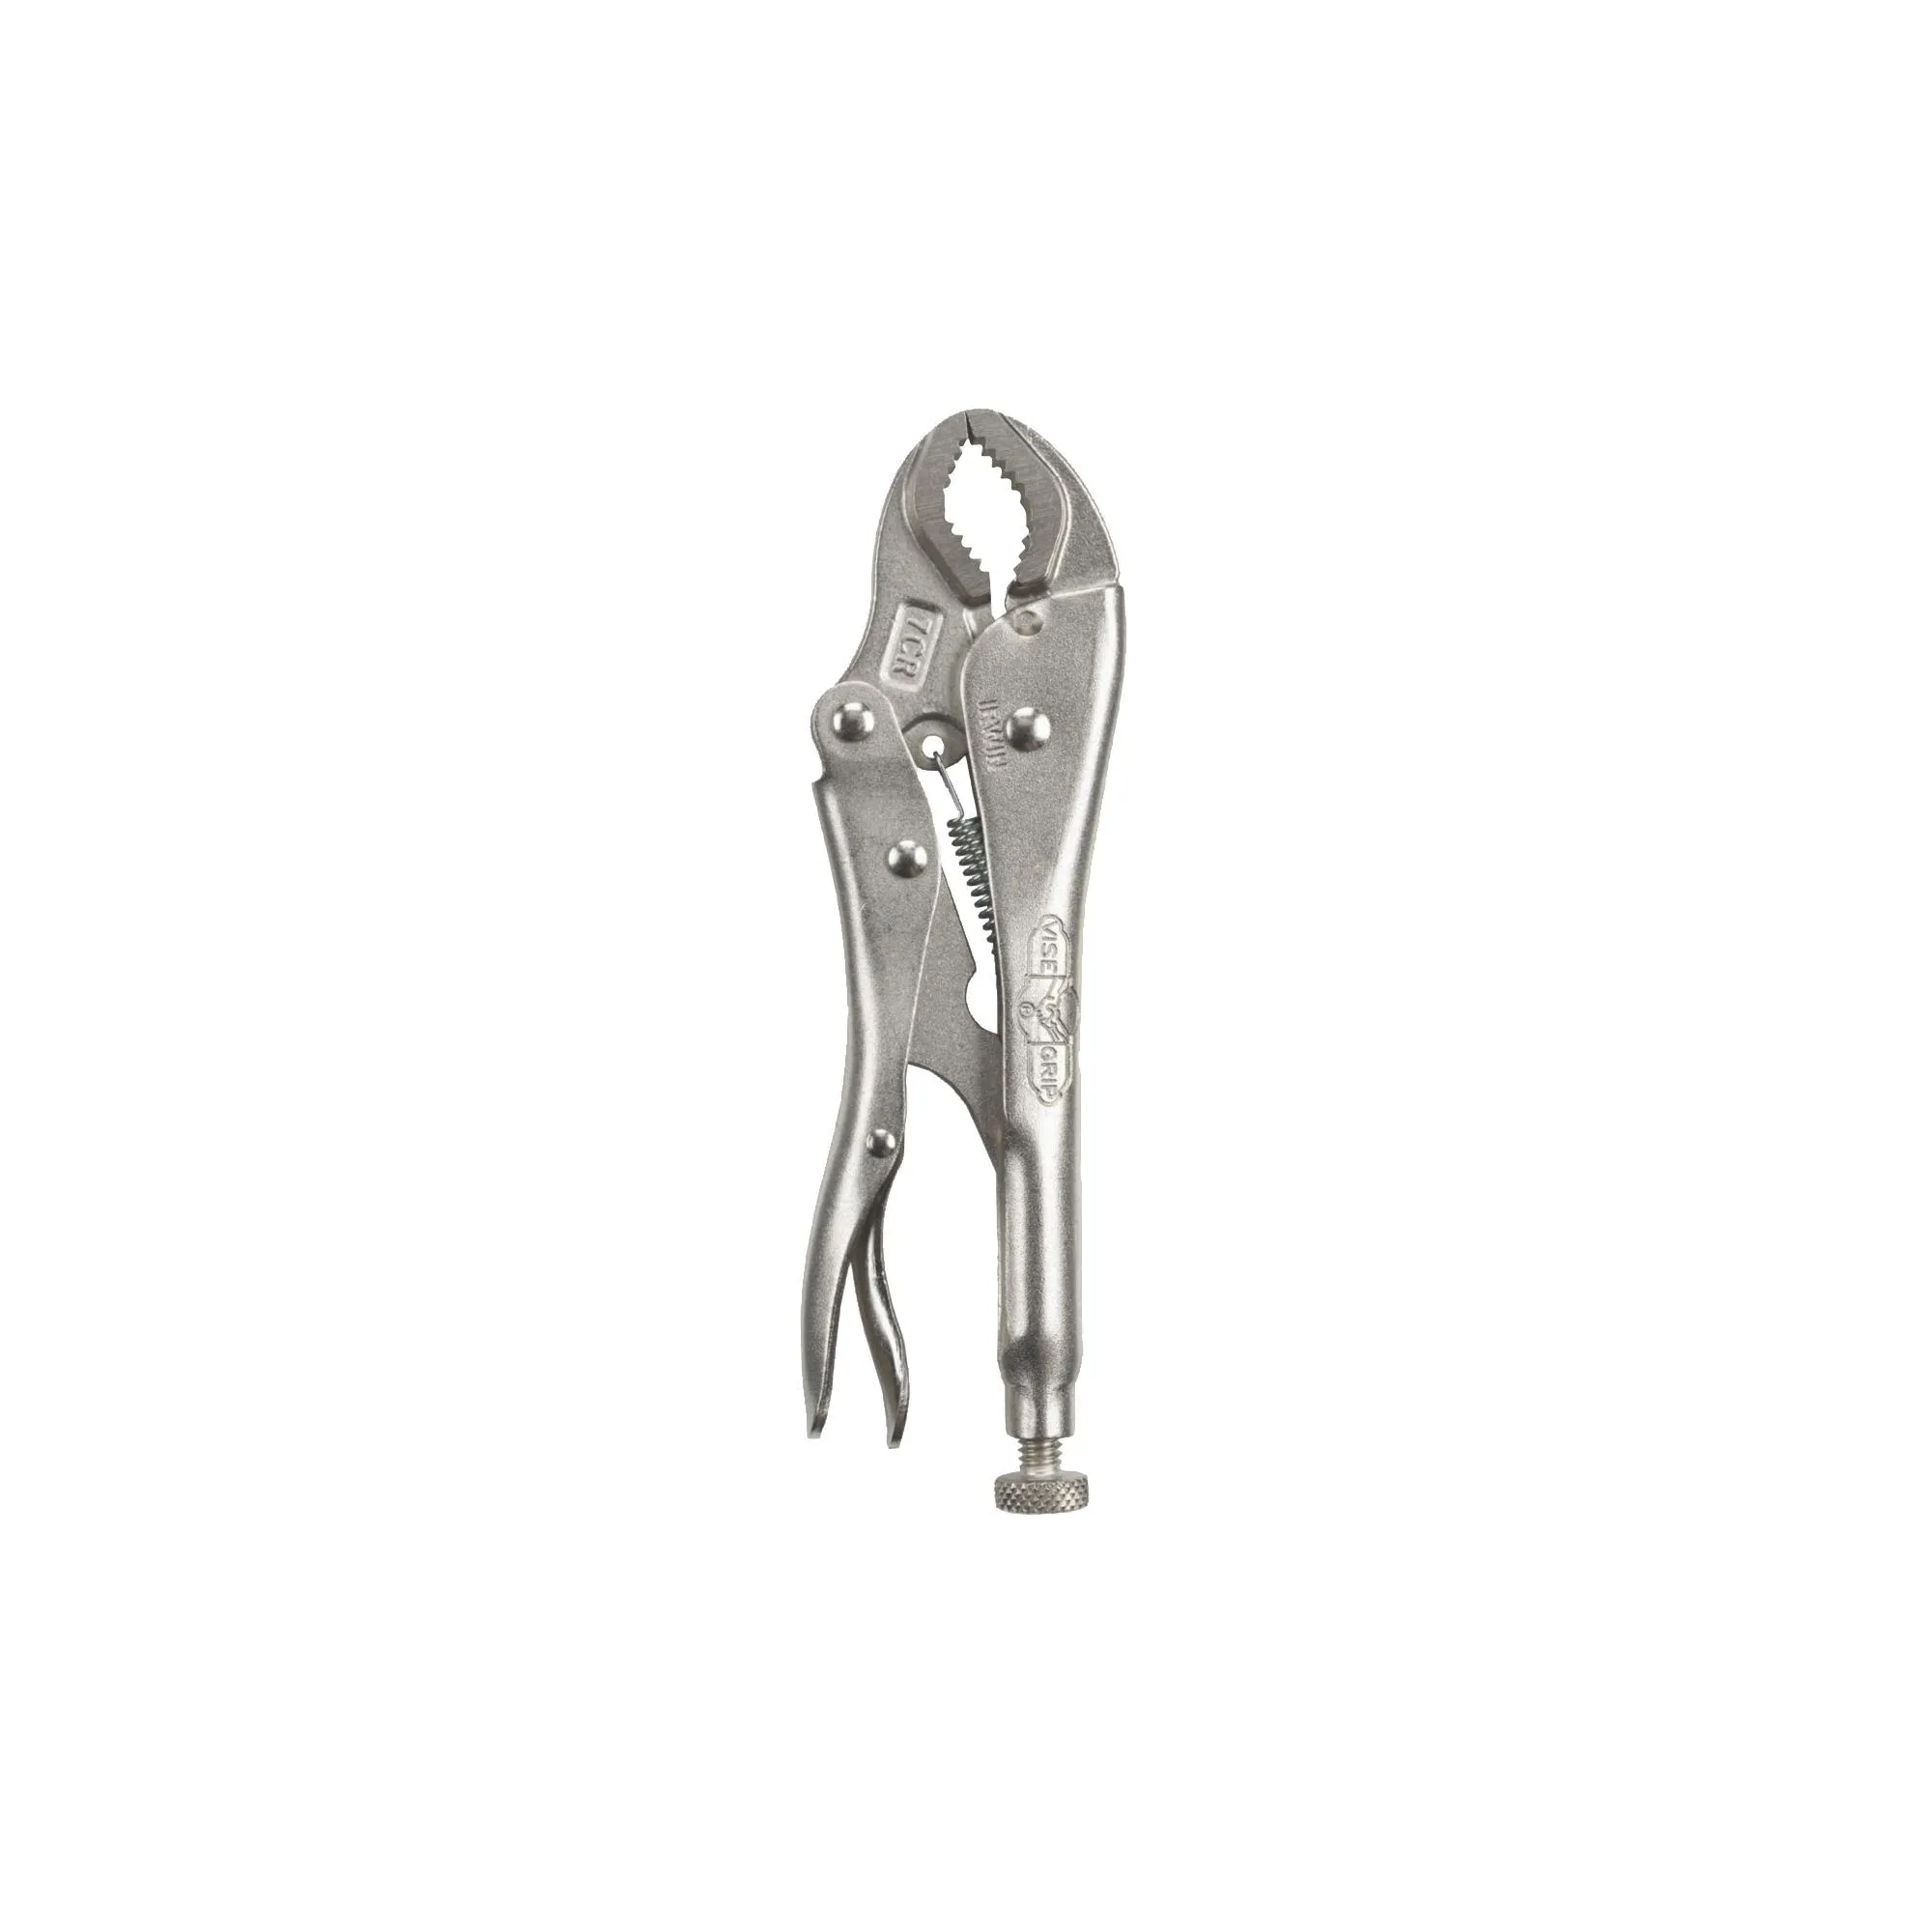 Irwin Vise-Grip 7" Curved jaw locking pliers